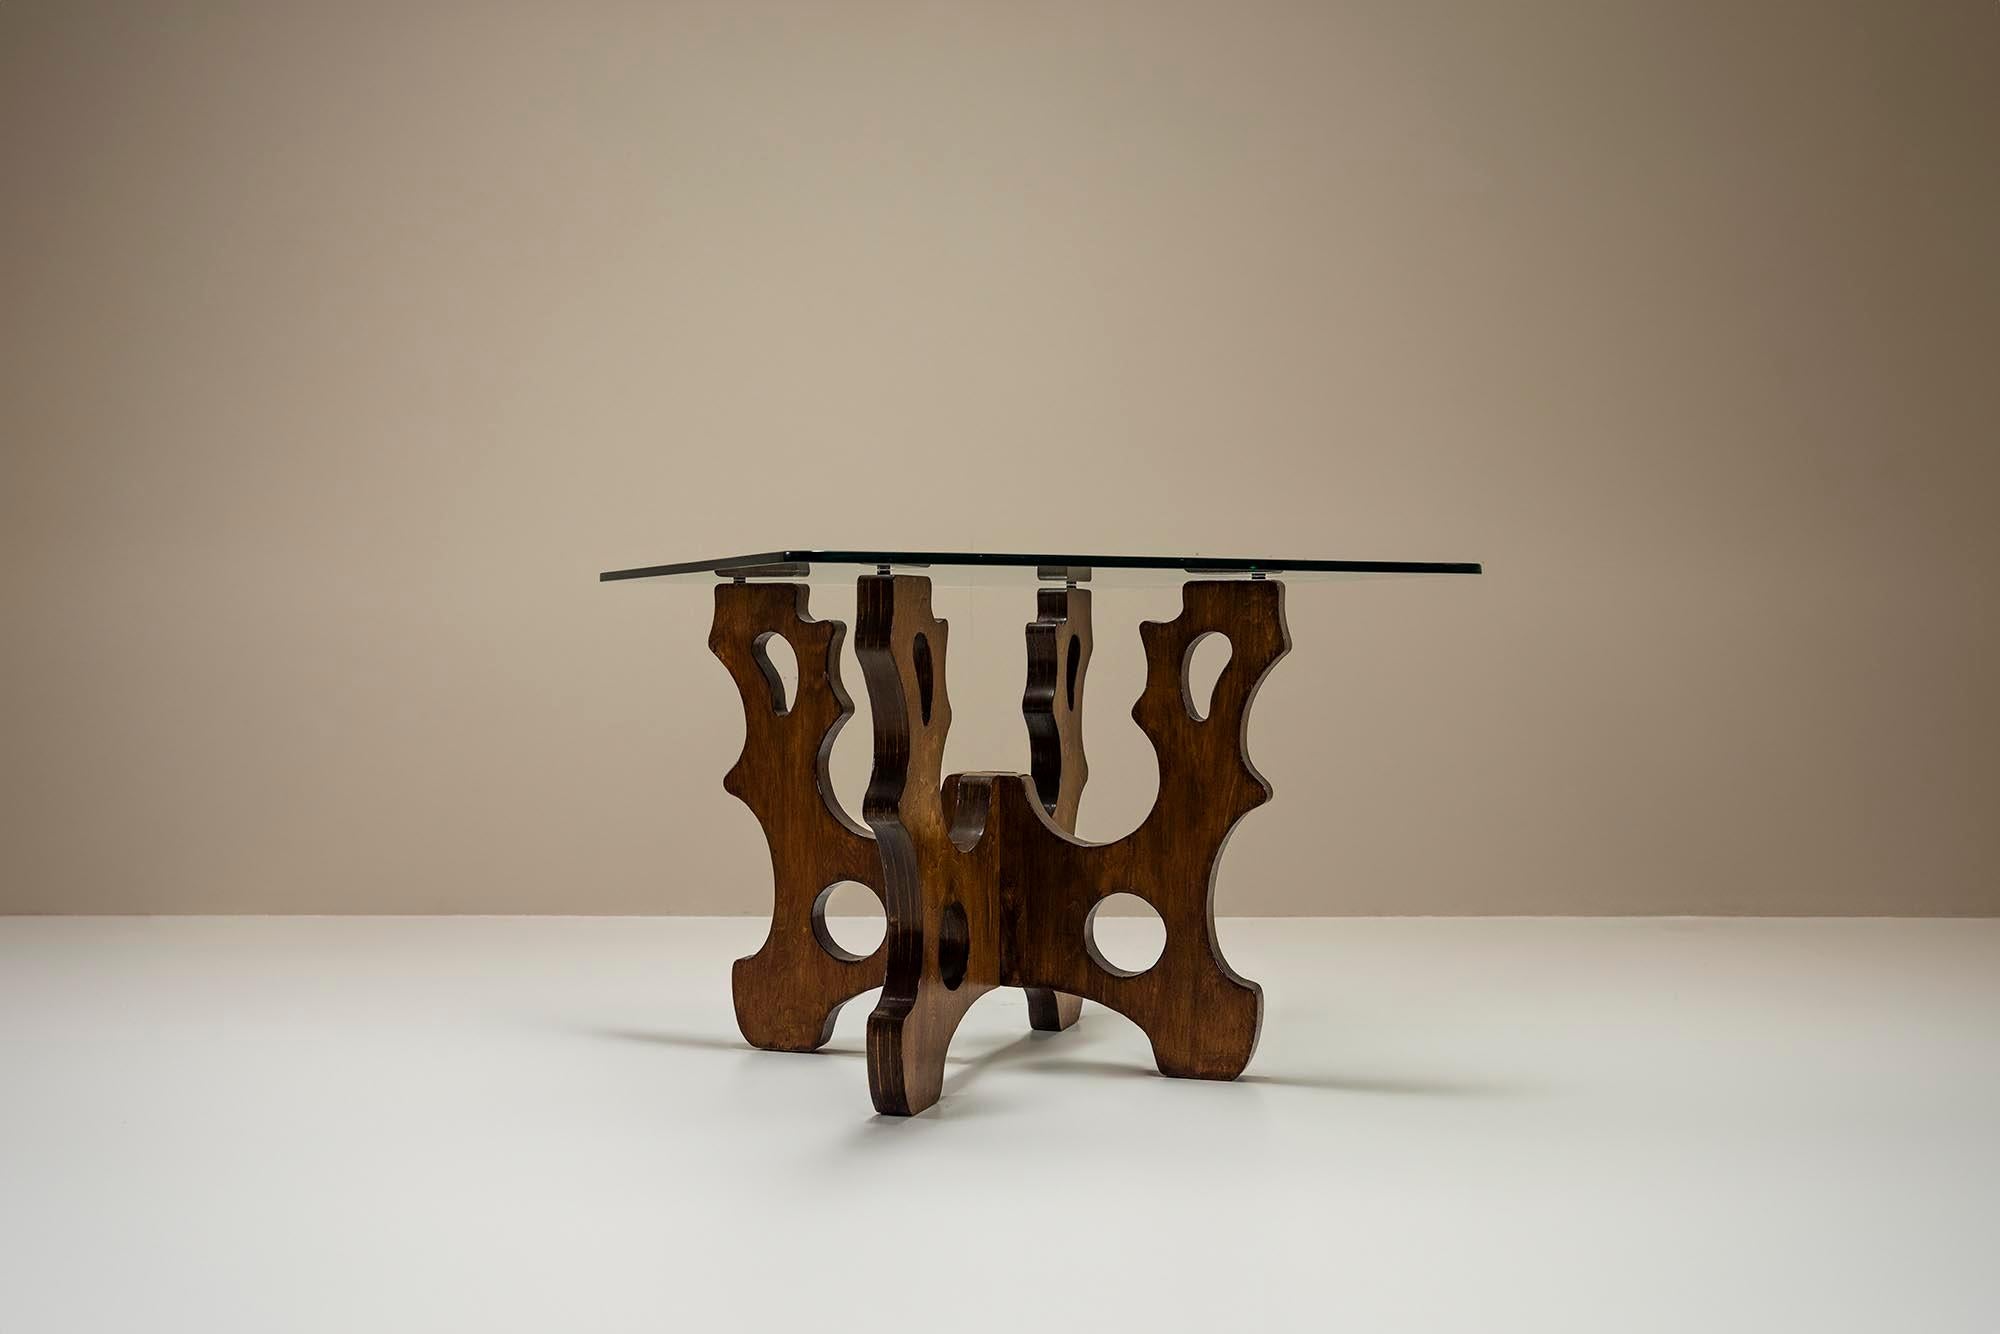 .This table has a base that describes itself best as an abstract geometric shape with a high expressive quality. There is no doubt that this object will immediately attract attention when one enters the room. We see a multitude of shapes in this